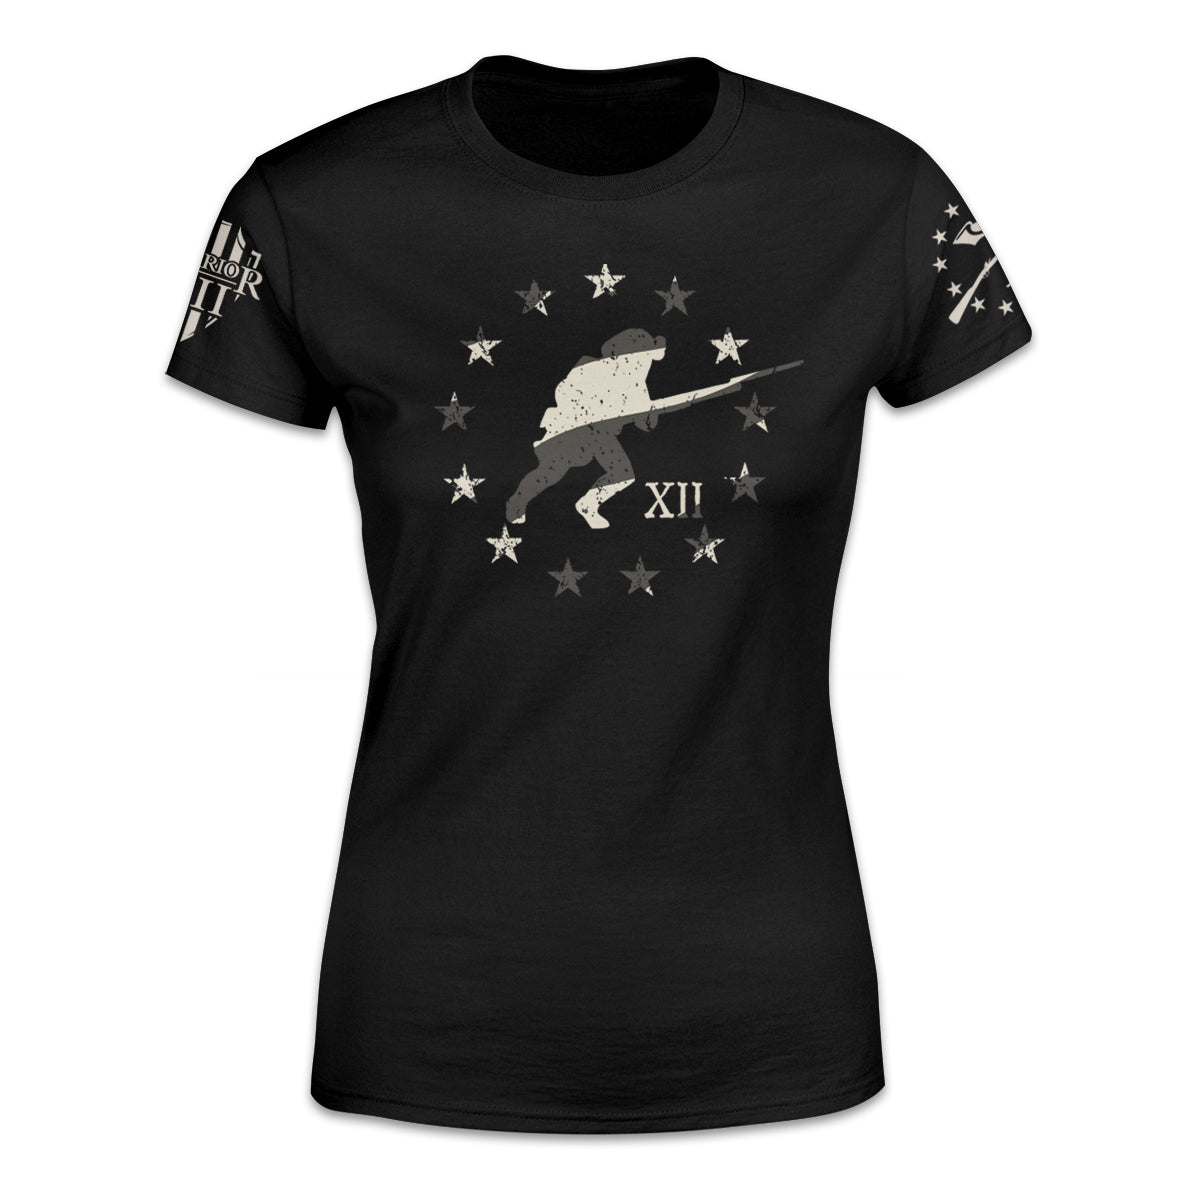 A black women's relaxed fit shirt with a soldier running with stars around him in a circle printed on the front of the shirt.